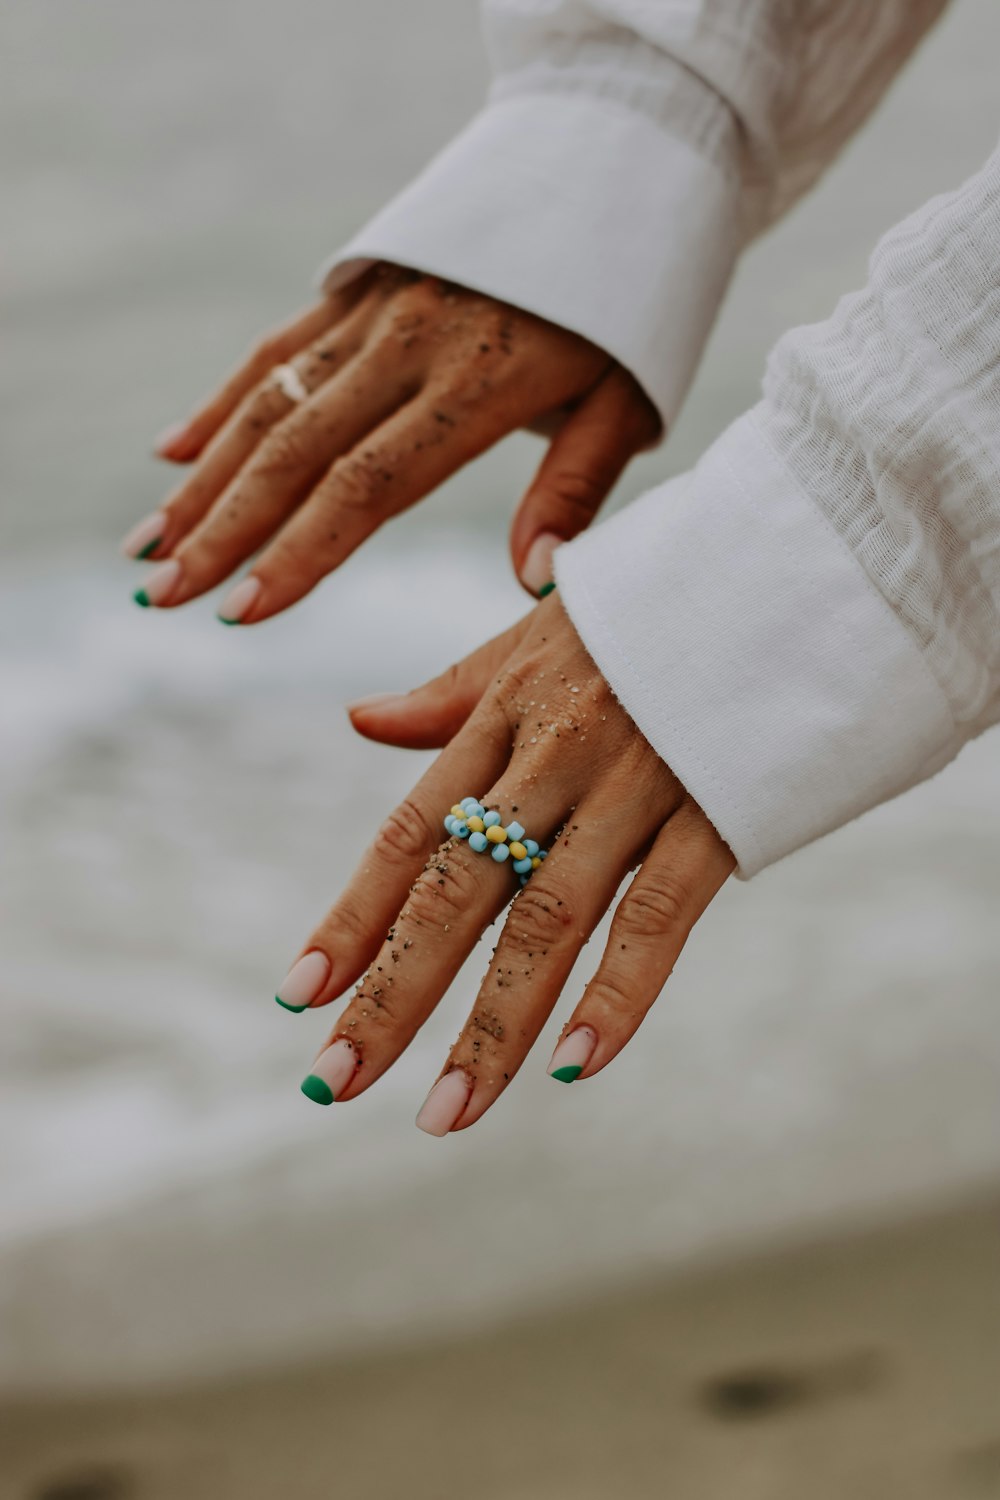 a person's hands holding a small green object